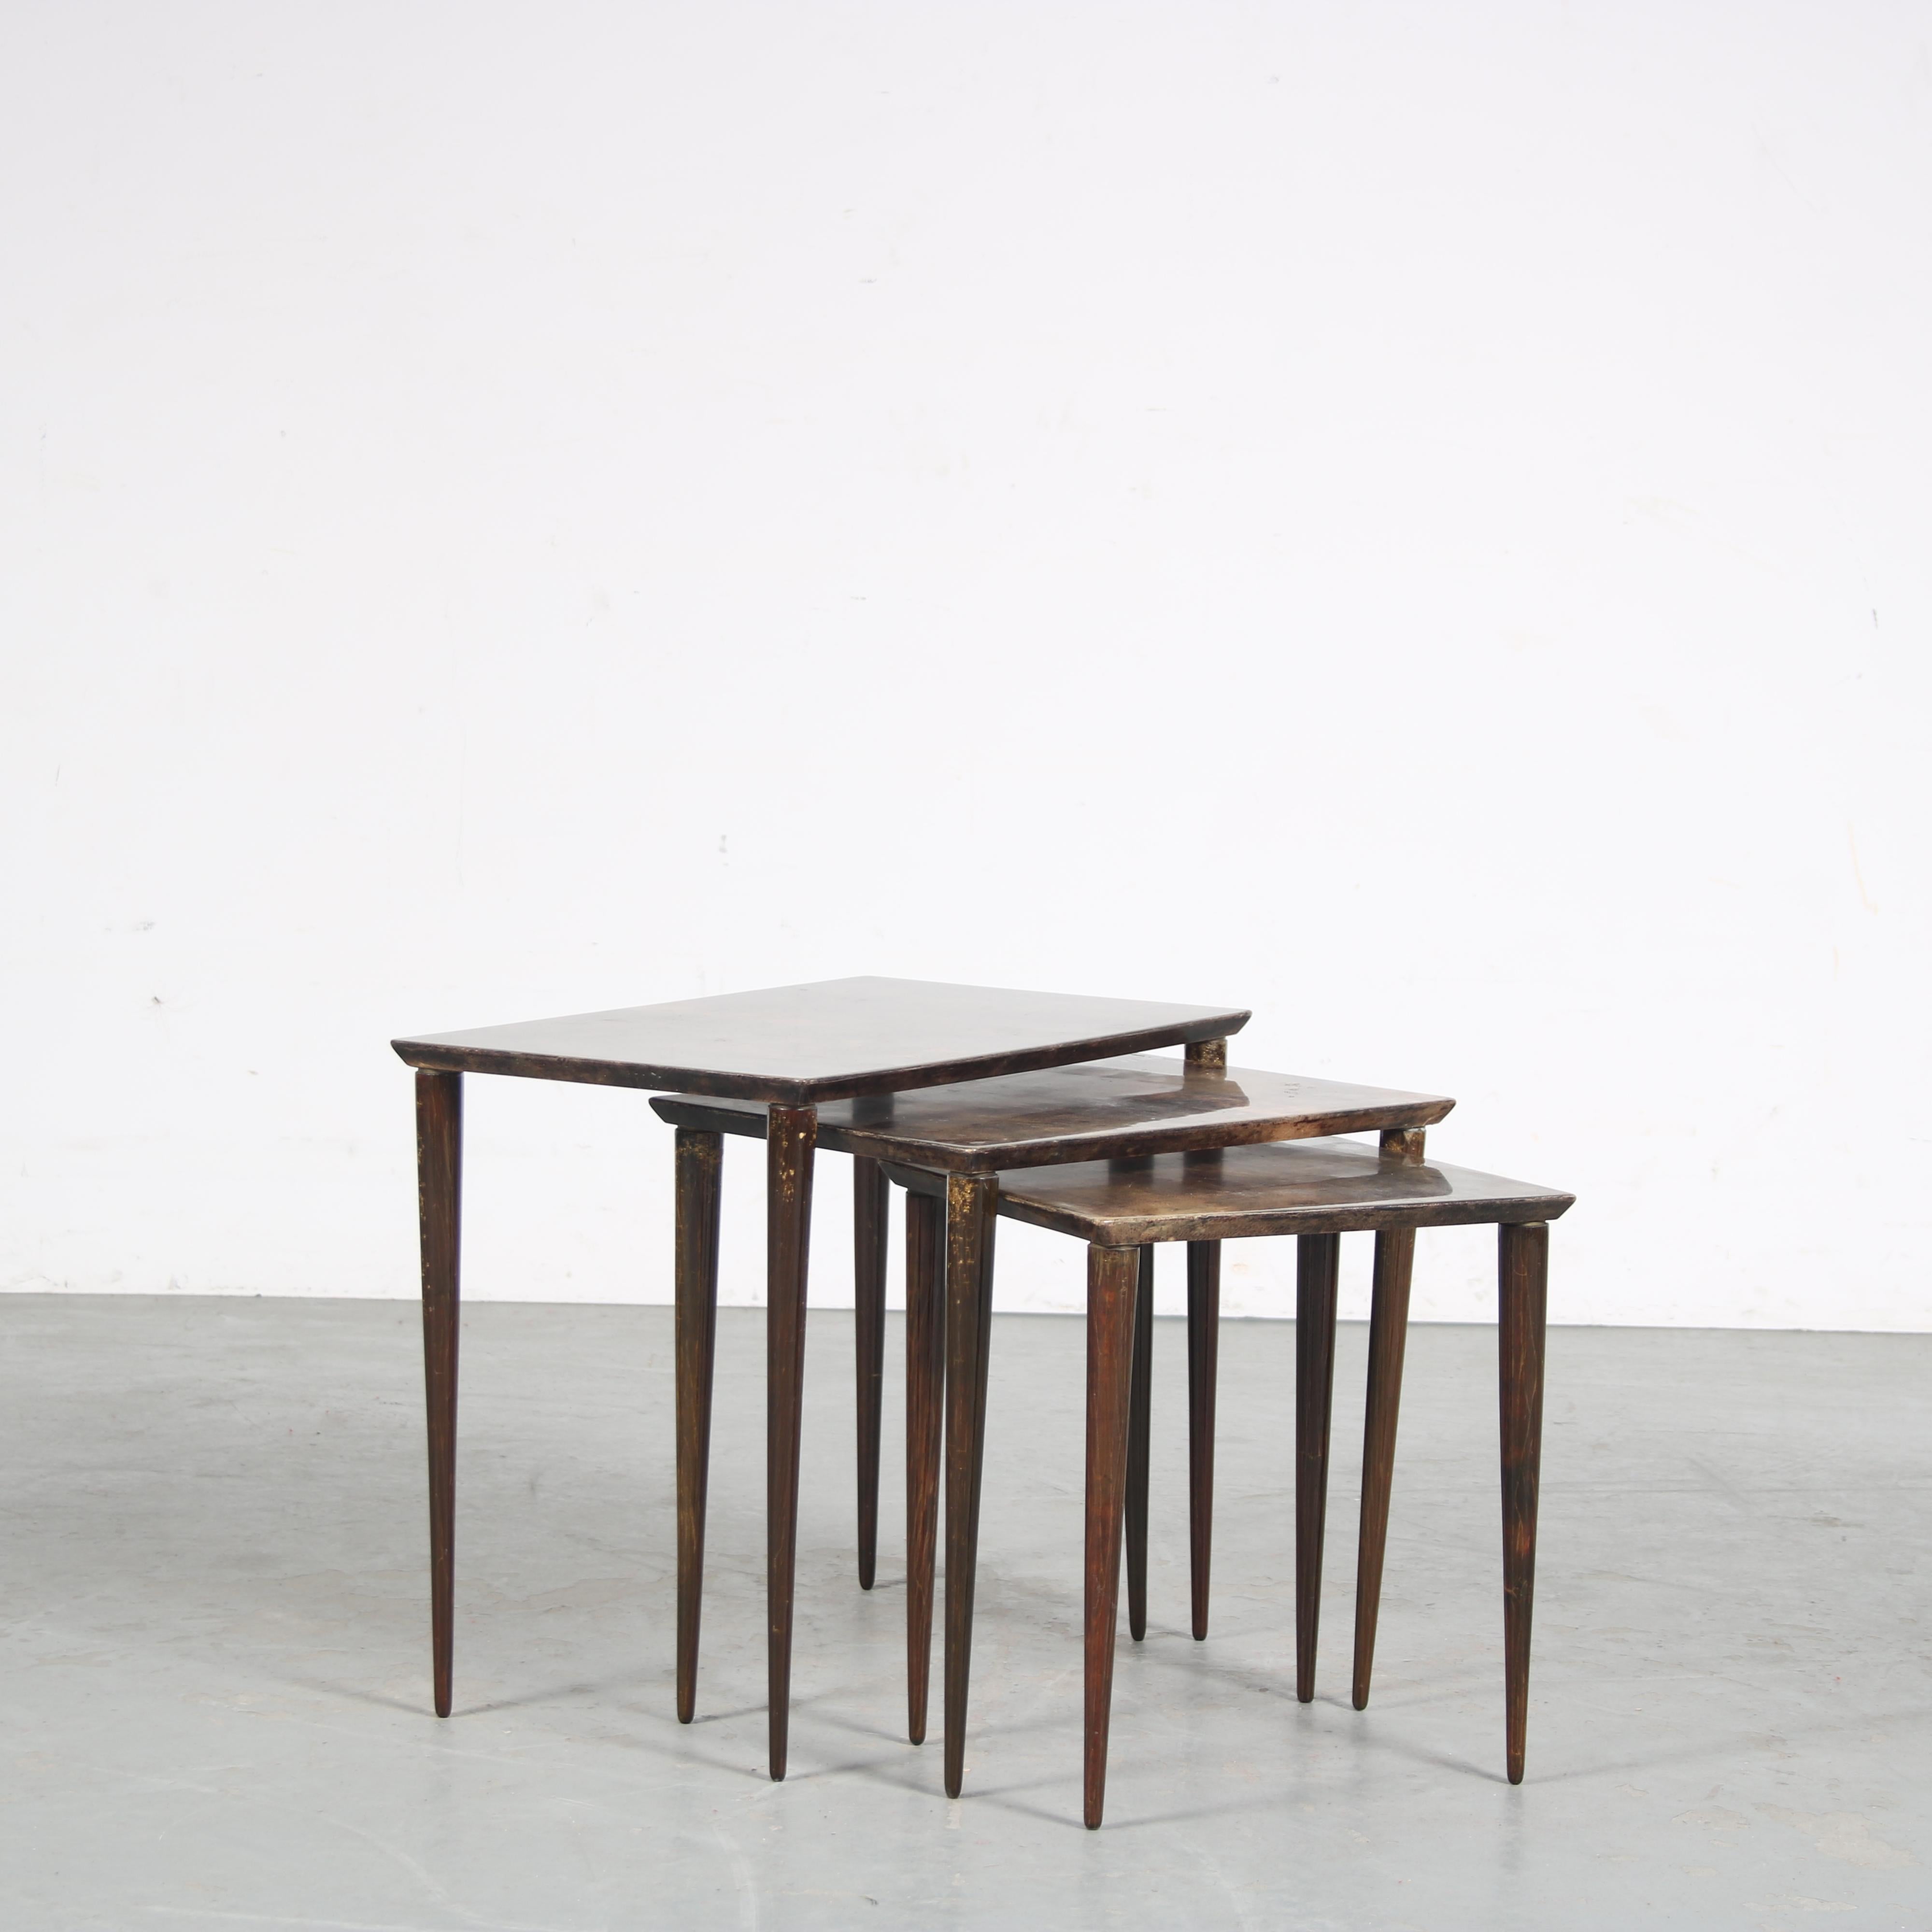 A beautiful set of three nesting tables, designed by Aldo Tura in Italy around 1950.

The tables are all made of high quality deep brown wood with parchments tops, giving them a unique and highly recognizable style. The tables are beautifully